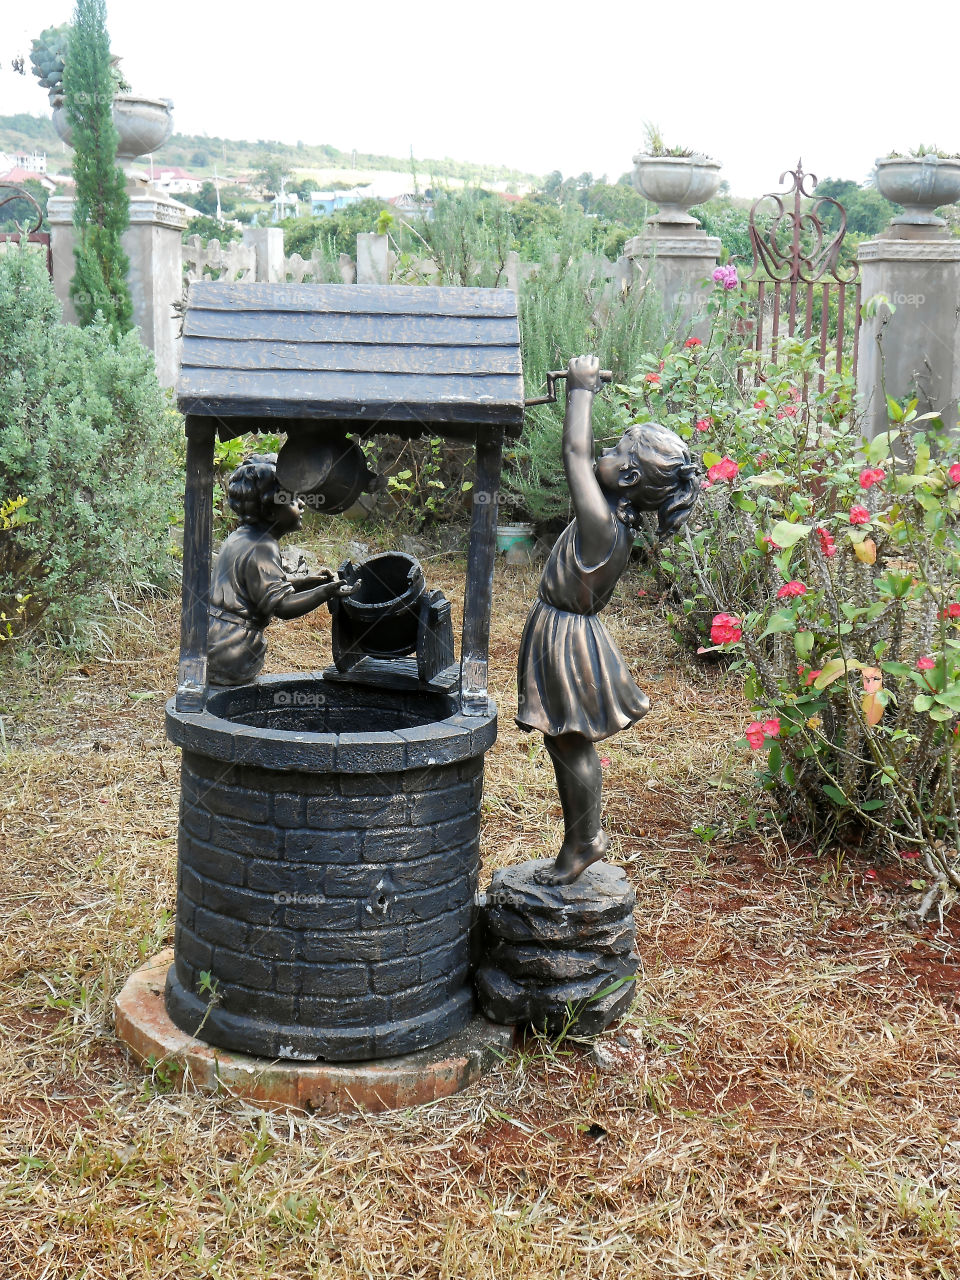 Garden Ornament (At The Well)